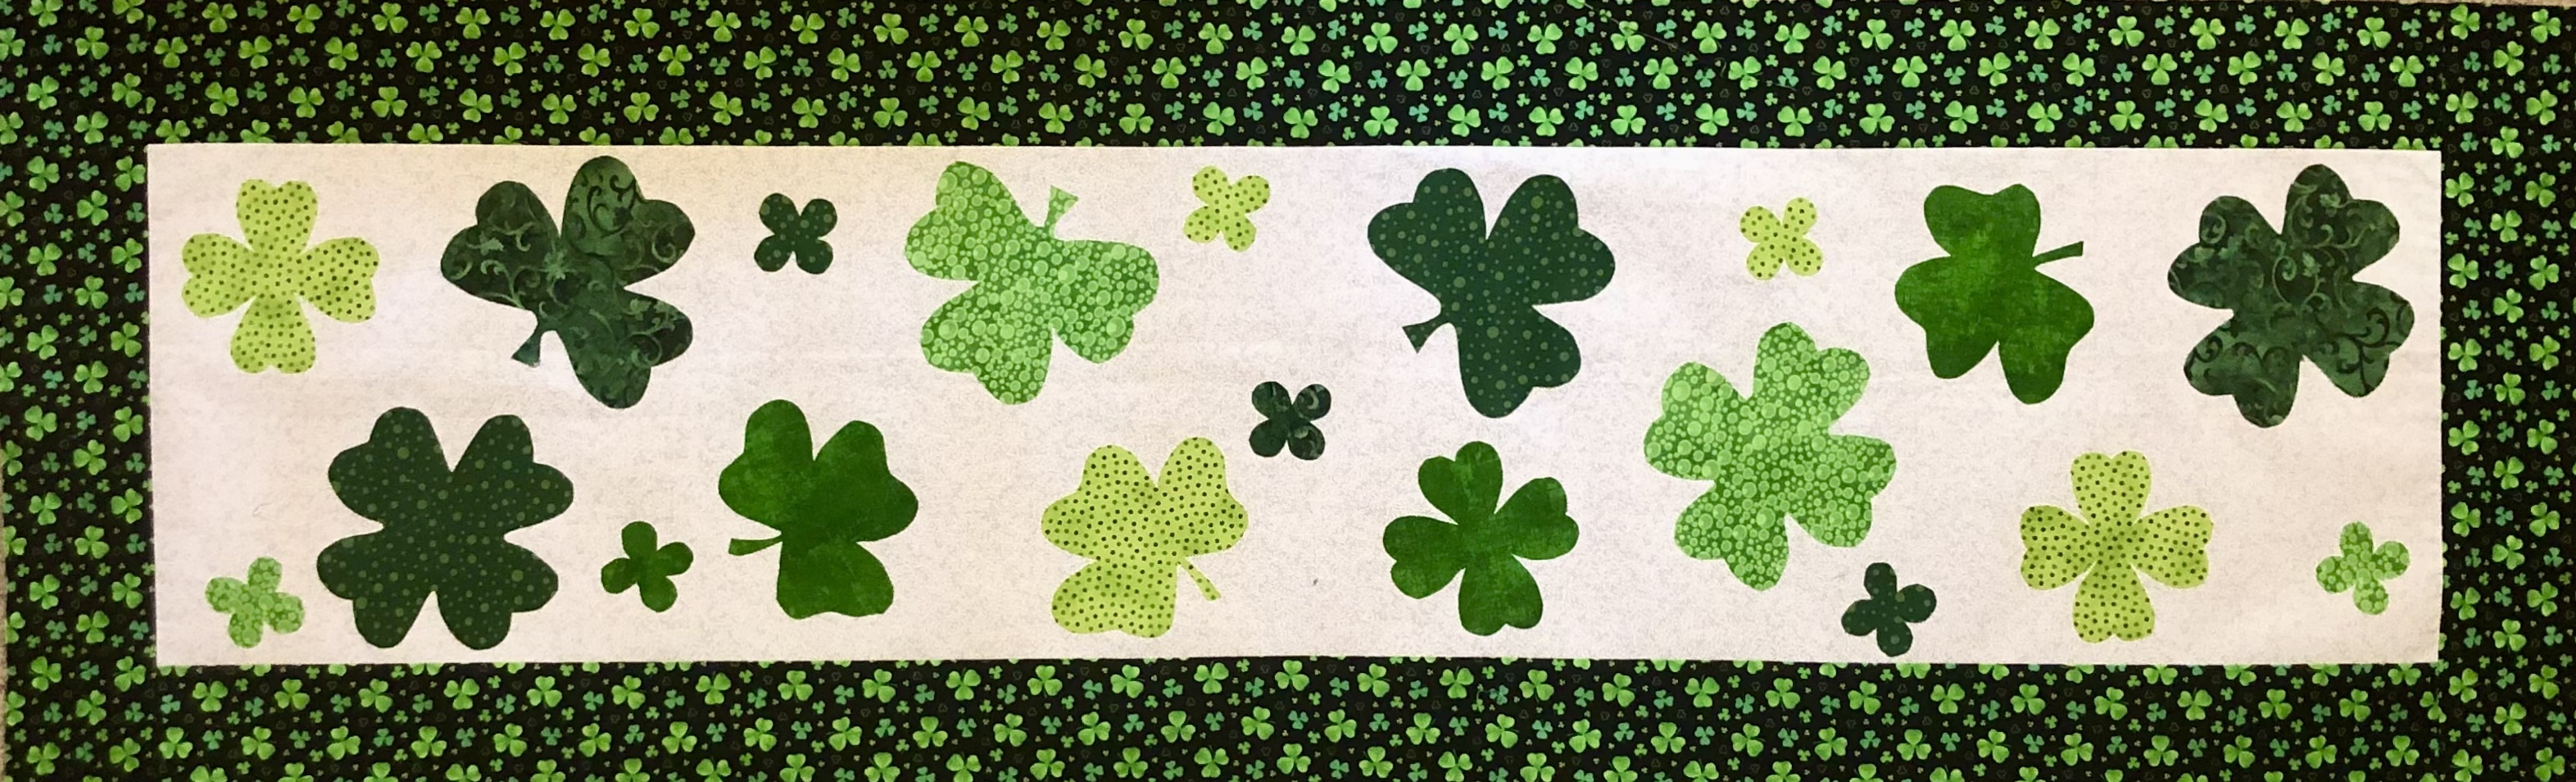 St. Paddy’s Day Table Runner 59245